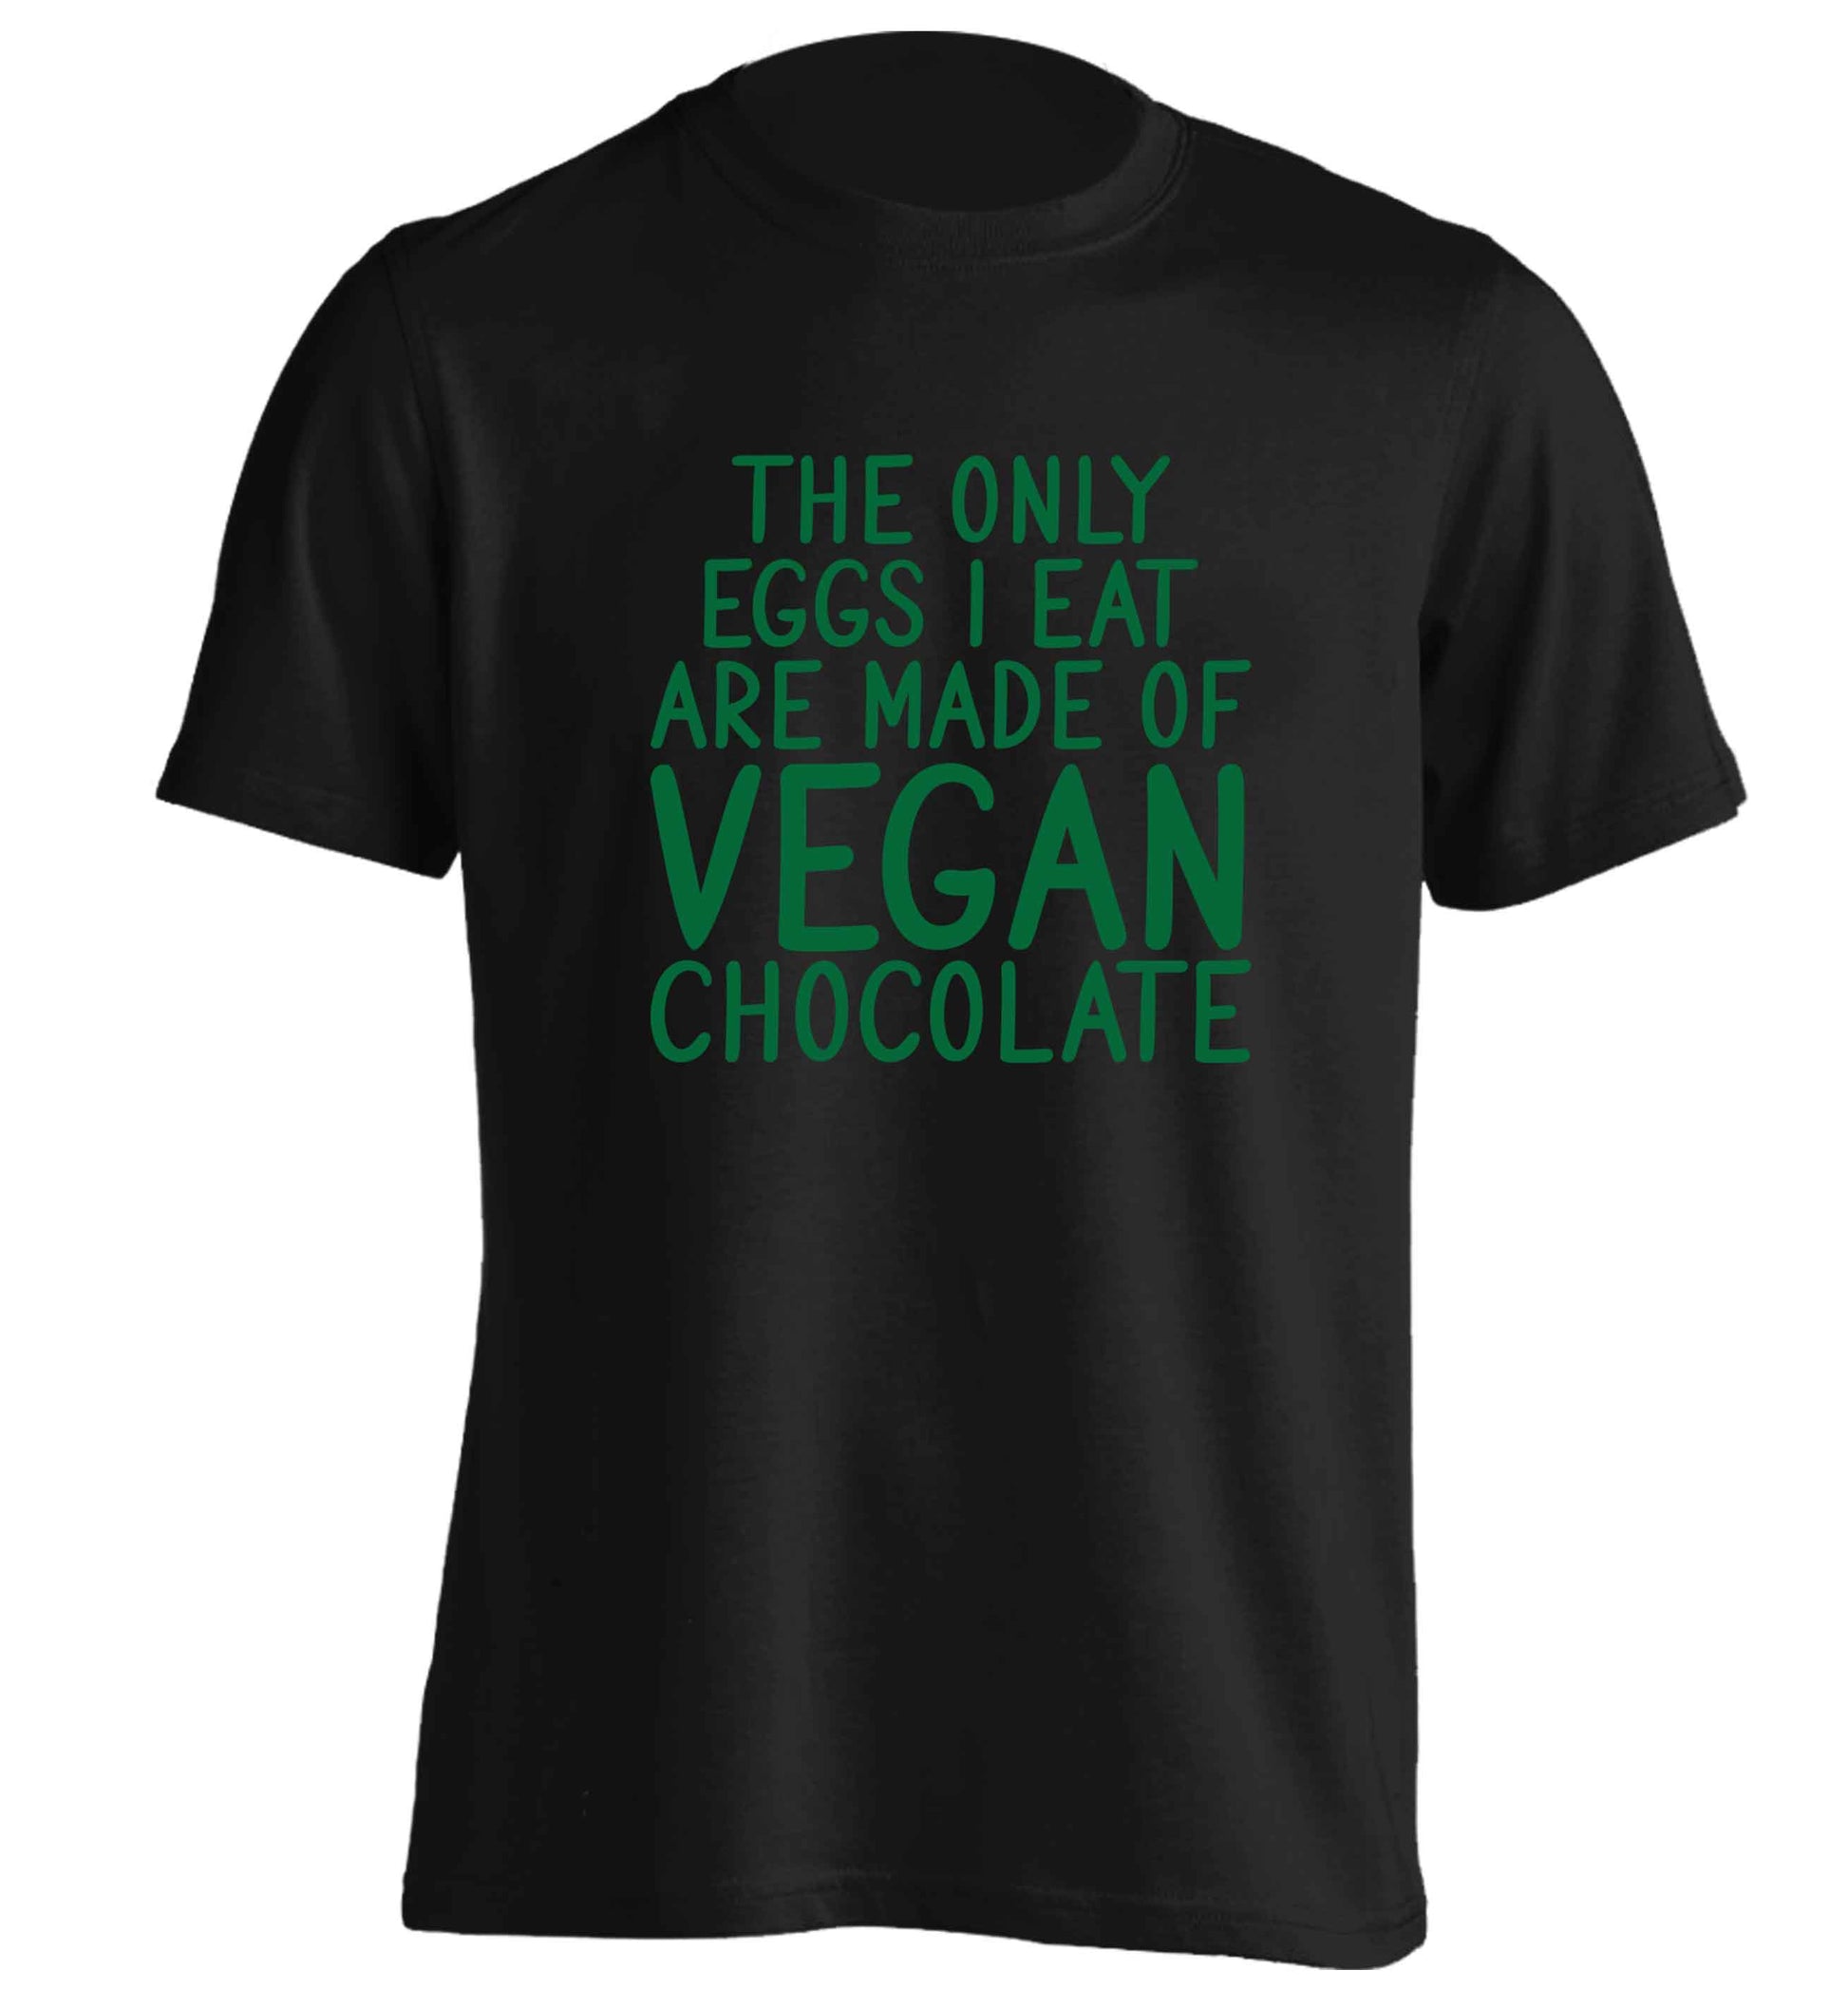 The only eggs I eat are made of vegan chocolate adults unisex black Tshirt 2XL